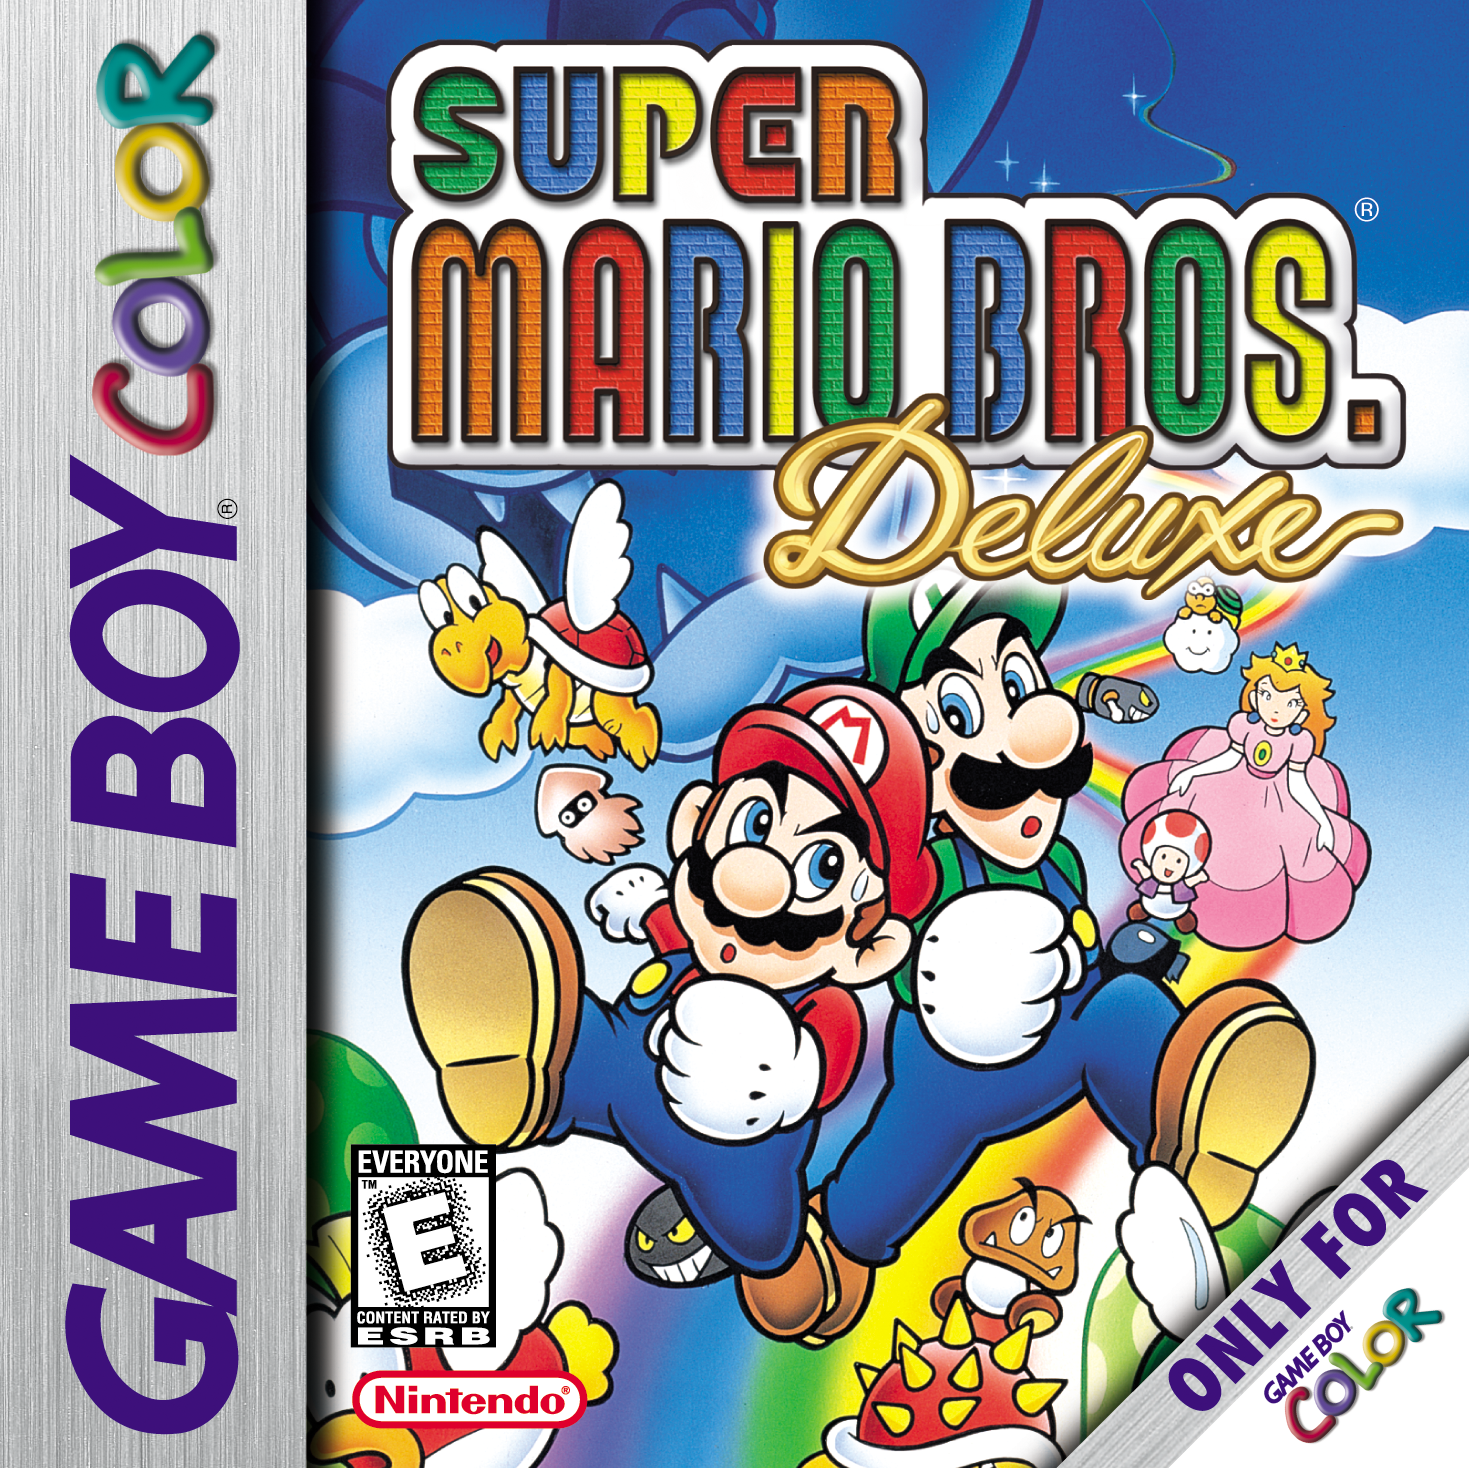 Super Mario Bros. Deluxe, Awesome Games Wiki